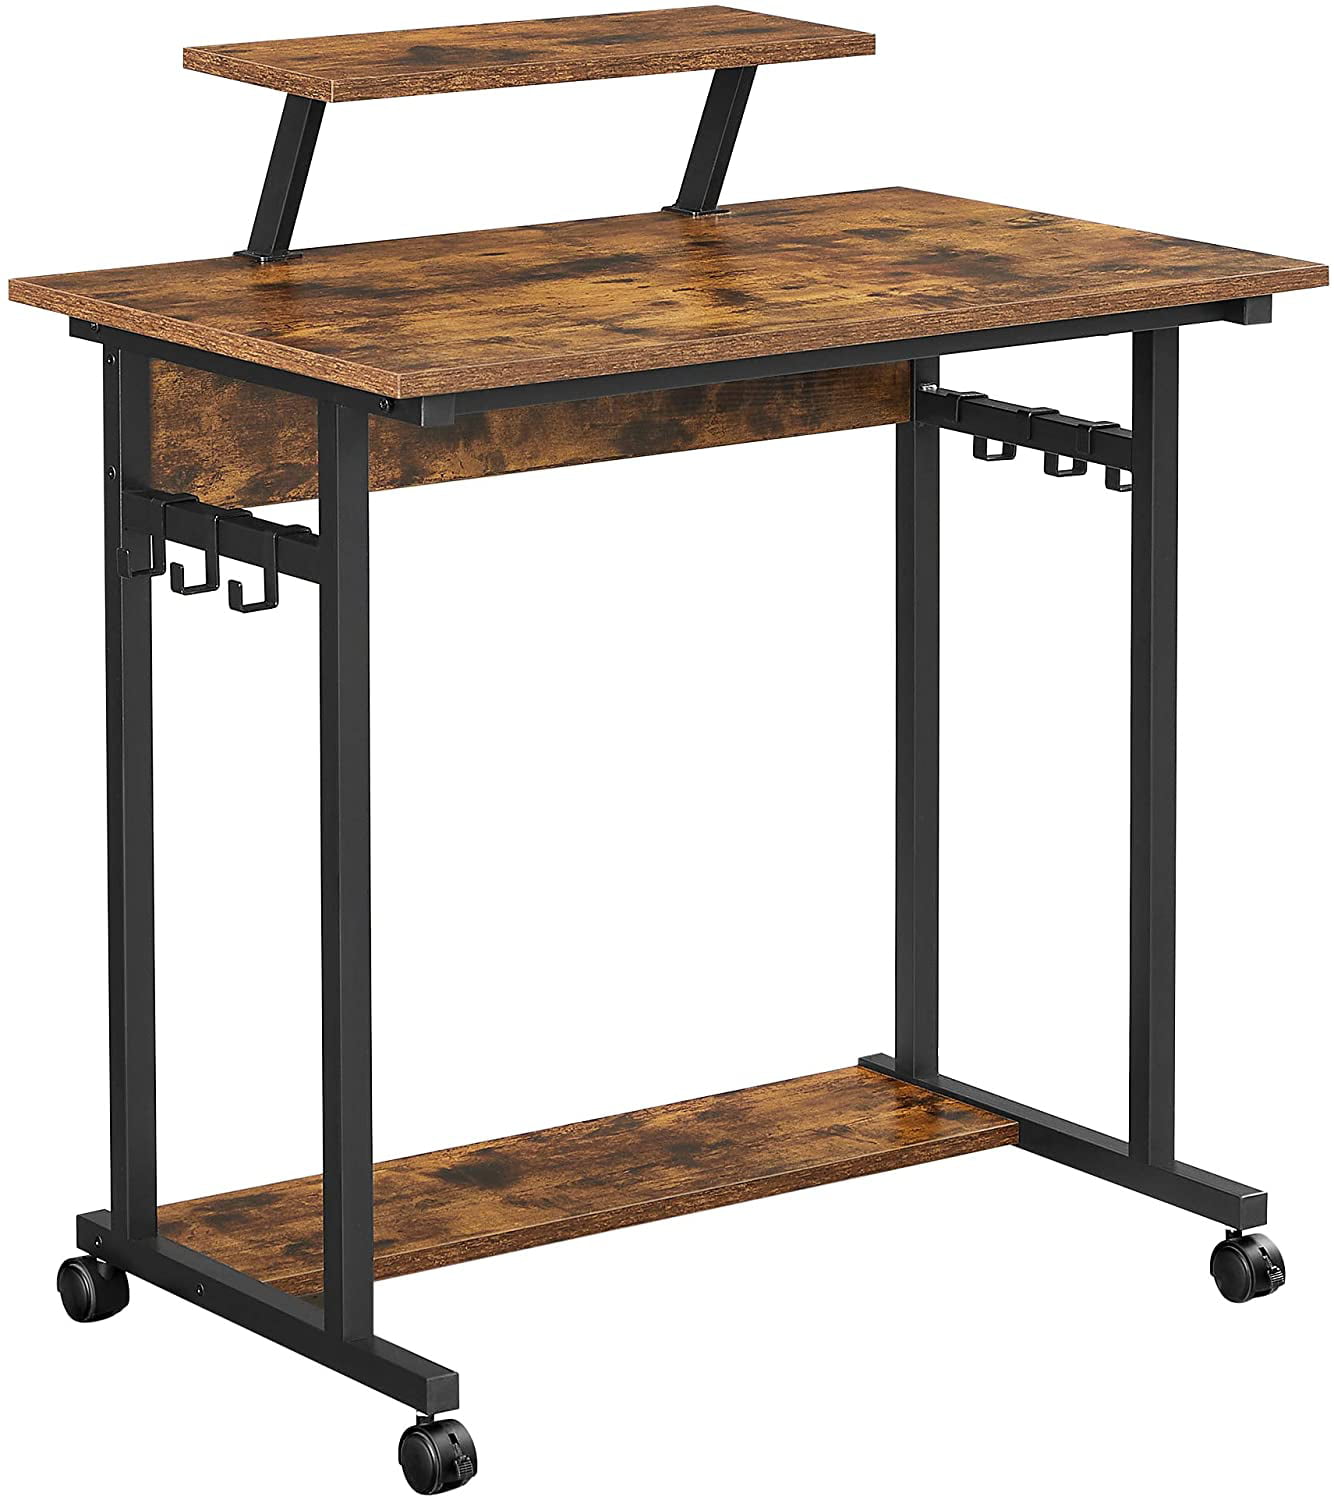 6 Hooks with Monitor Stand 31.5 x 19.7 x 35.4 Inches Rustic Brown and Black ULWD085B01 VASAGLE Mobile Computer Writing Desk Industrial for Home Office Work from Home 